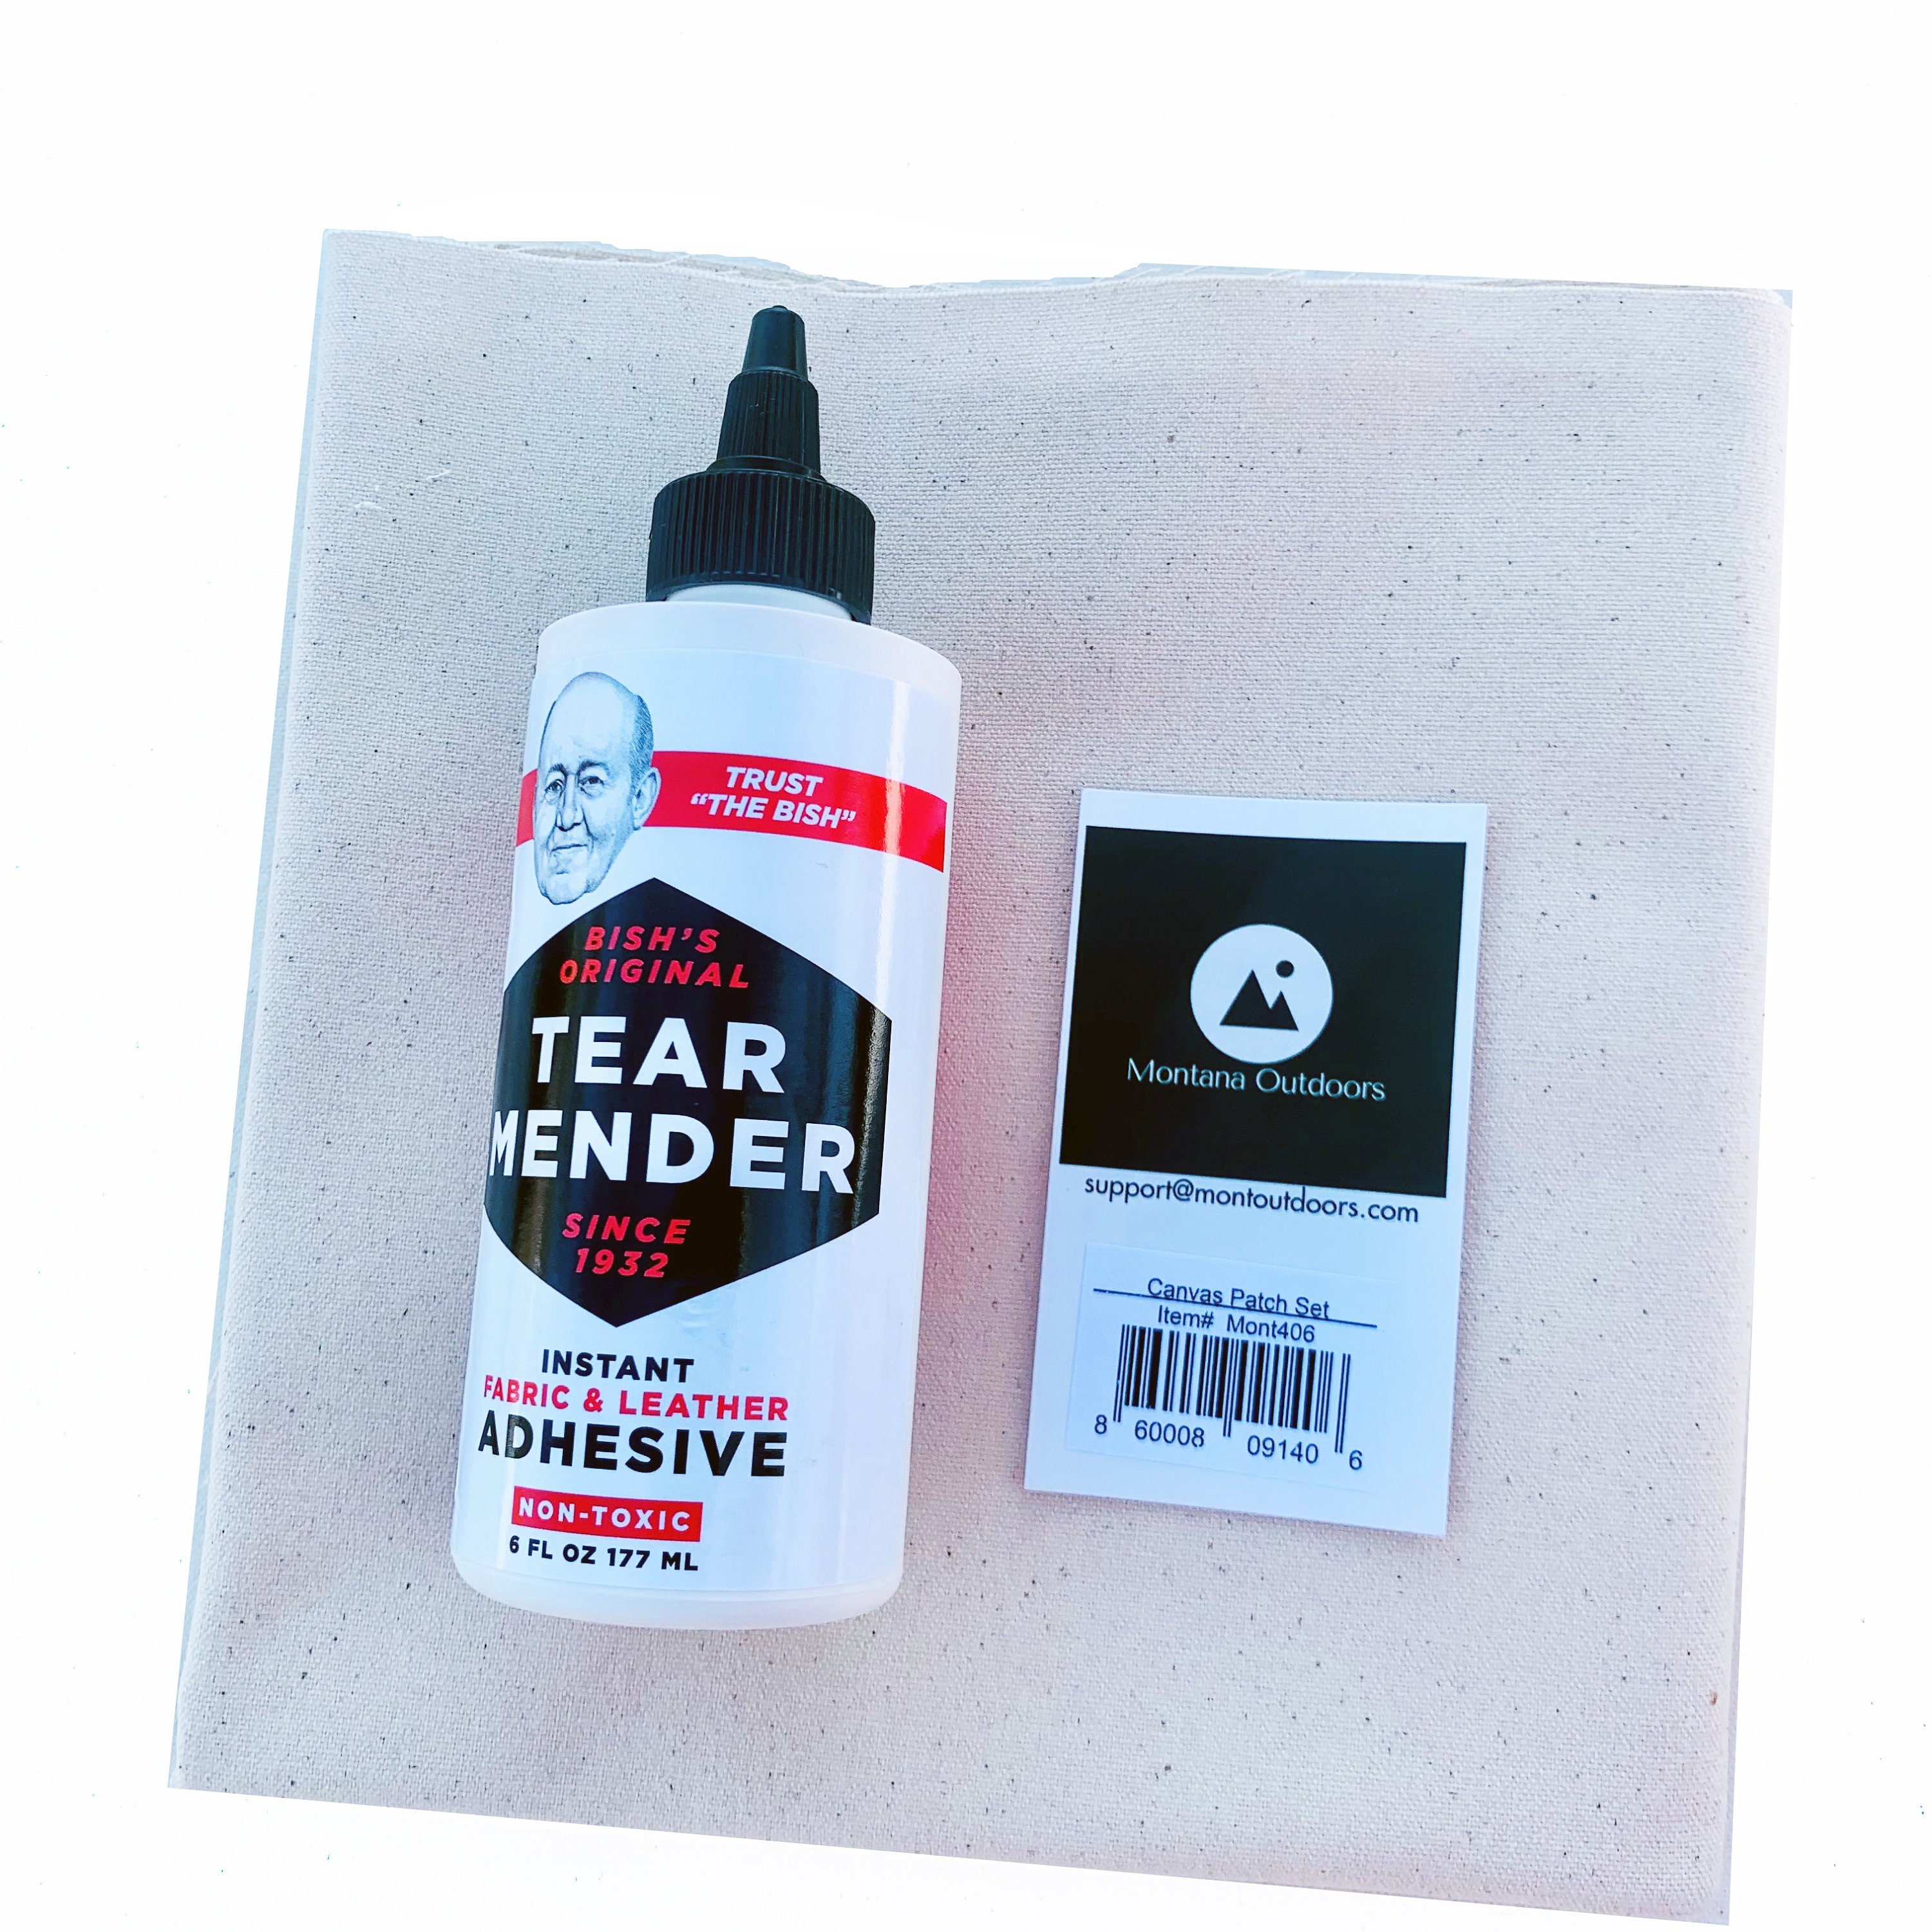 Pair of Tear Mender Instant Fabric & Leather Adhesives 2oz